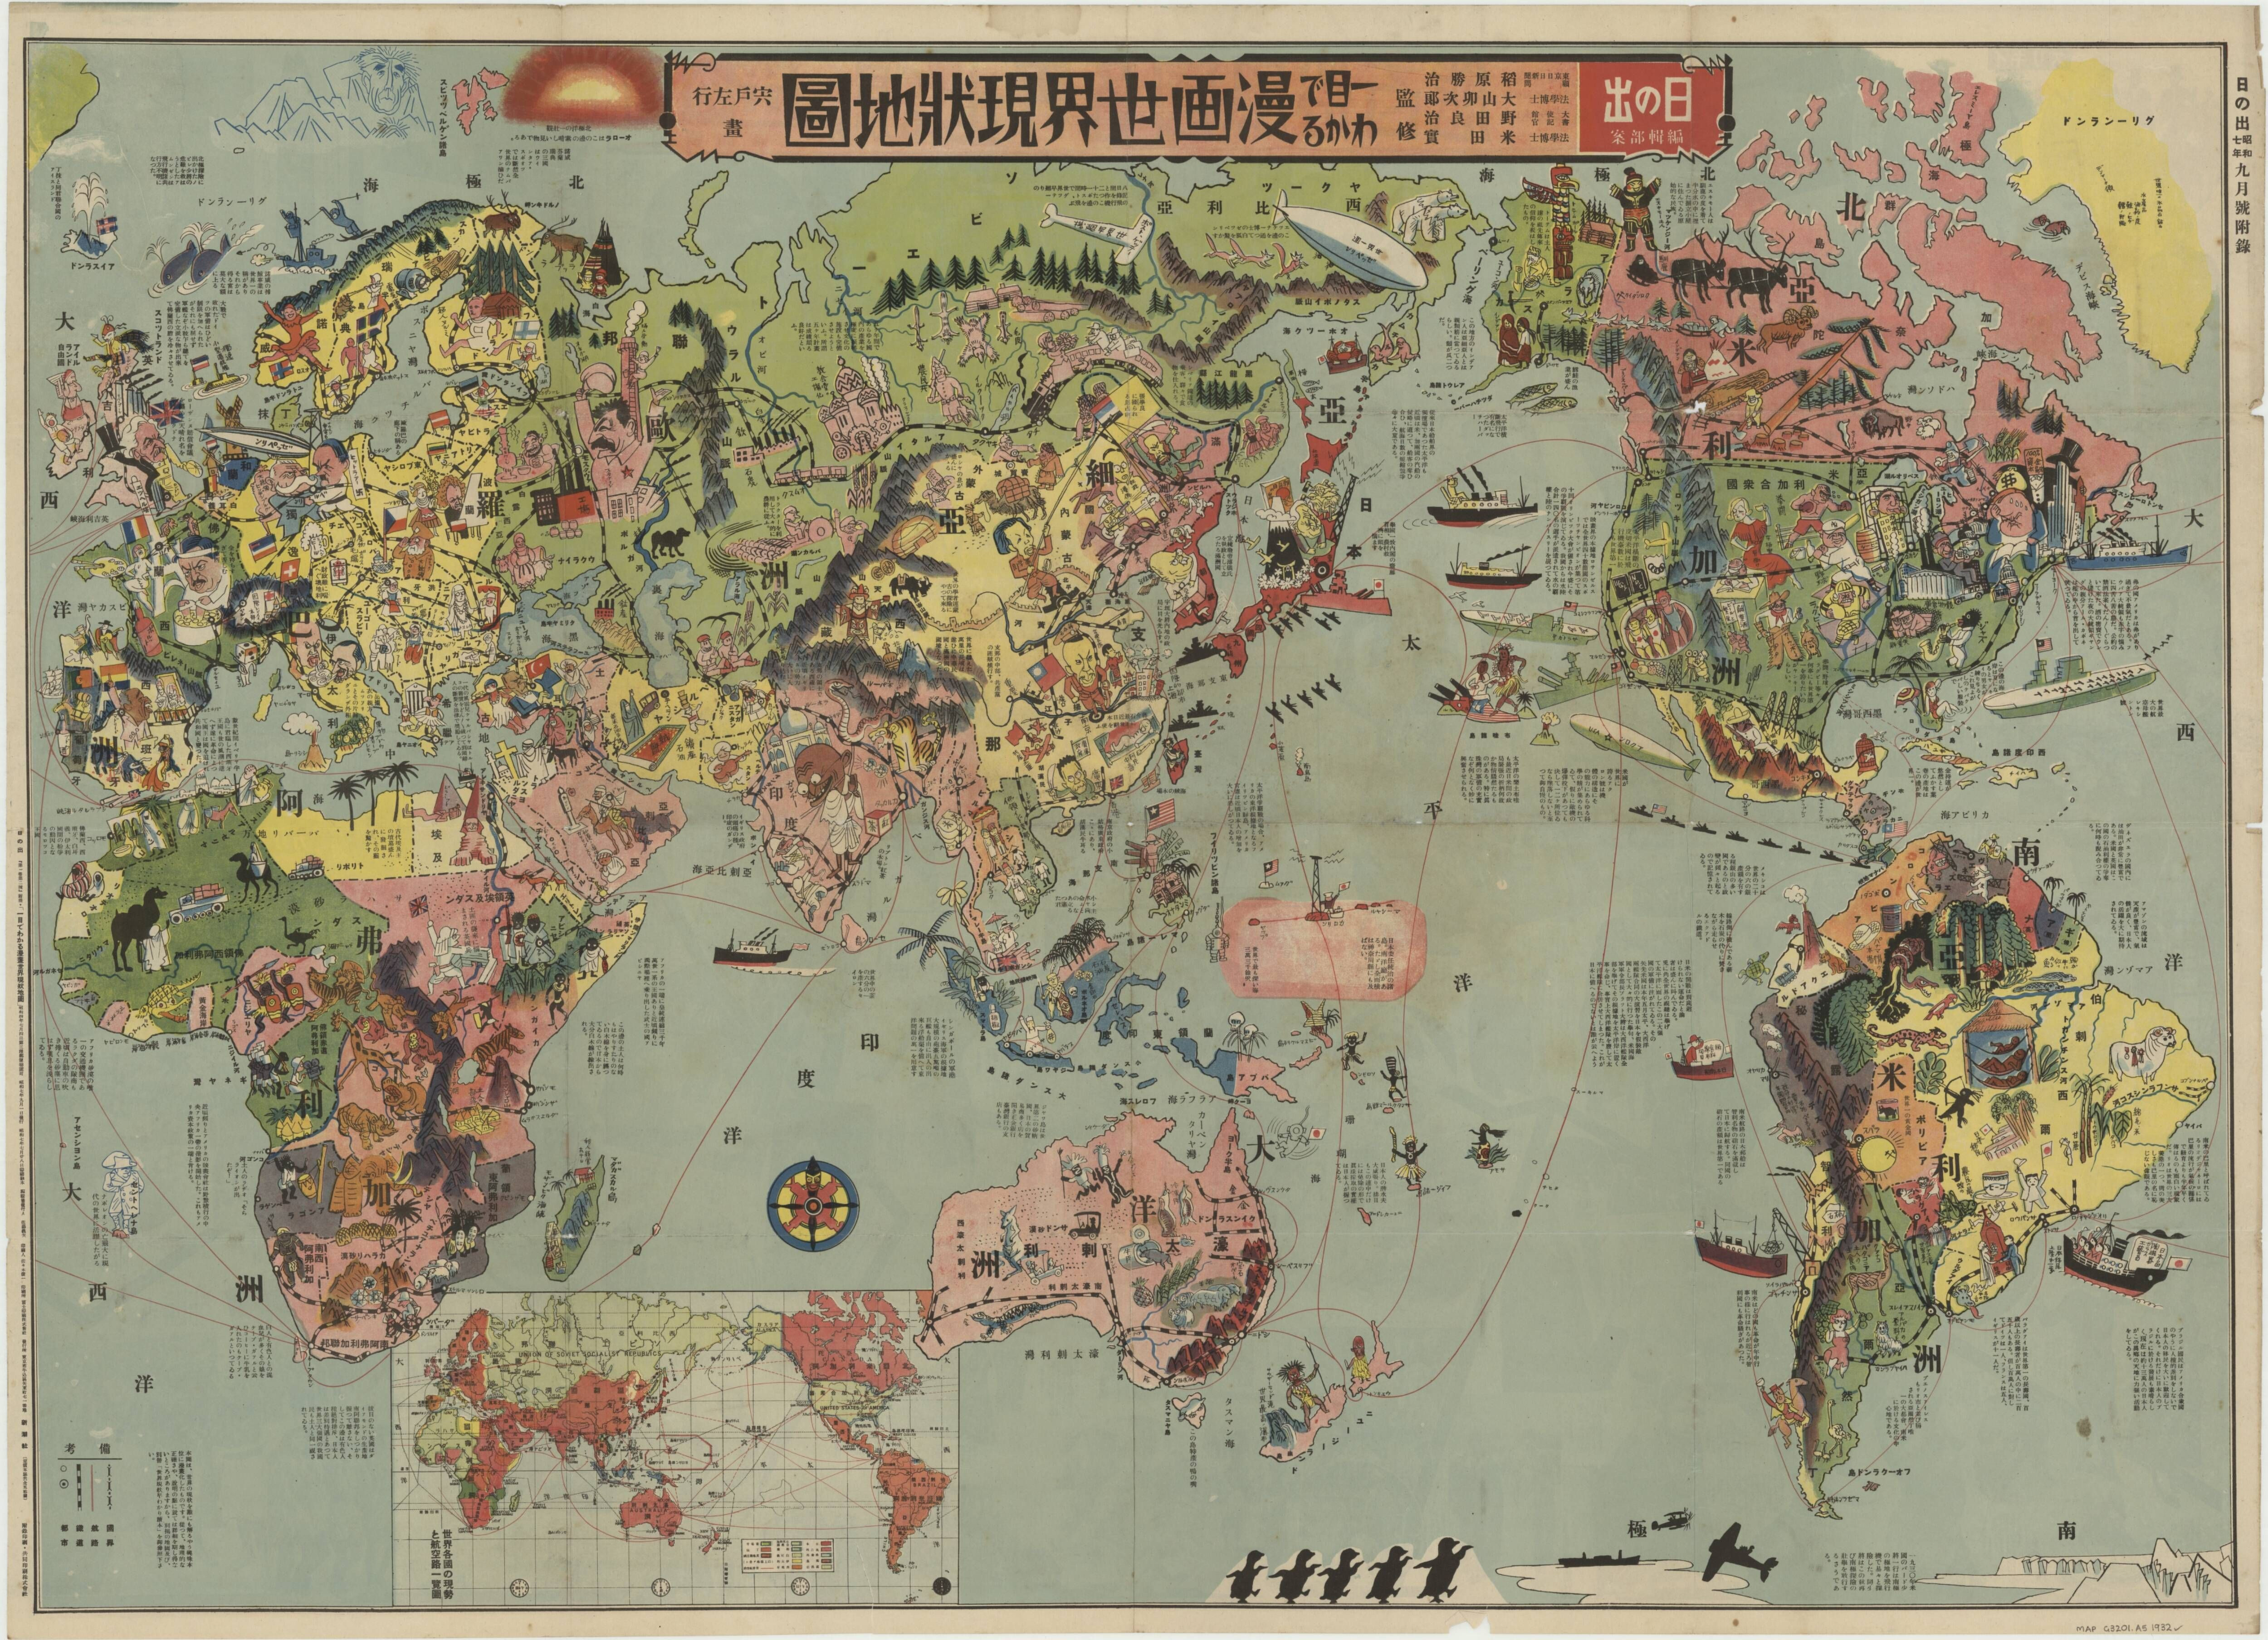 Japanese Pictorial World Map 1932 [5000  3616]